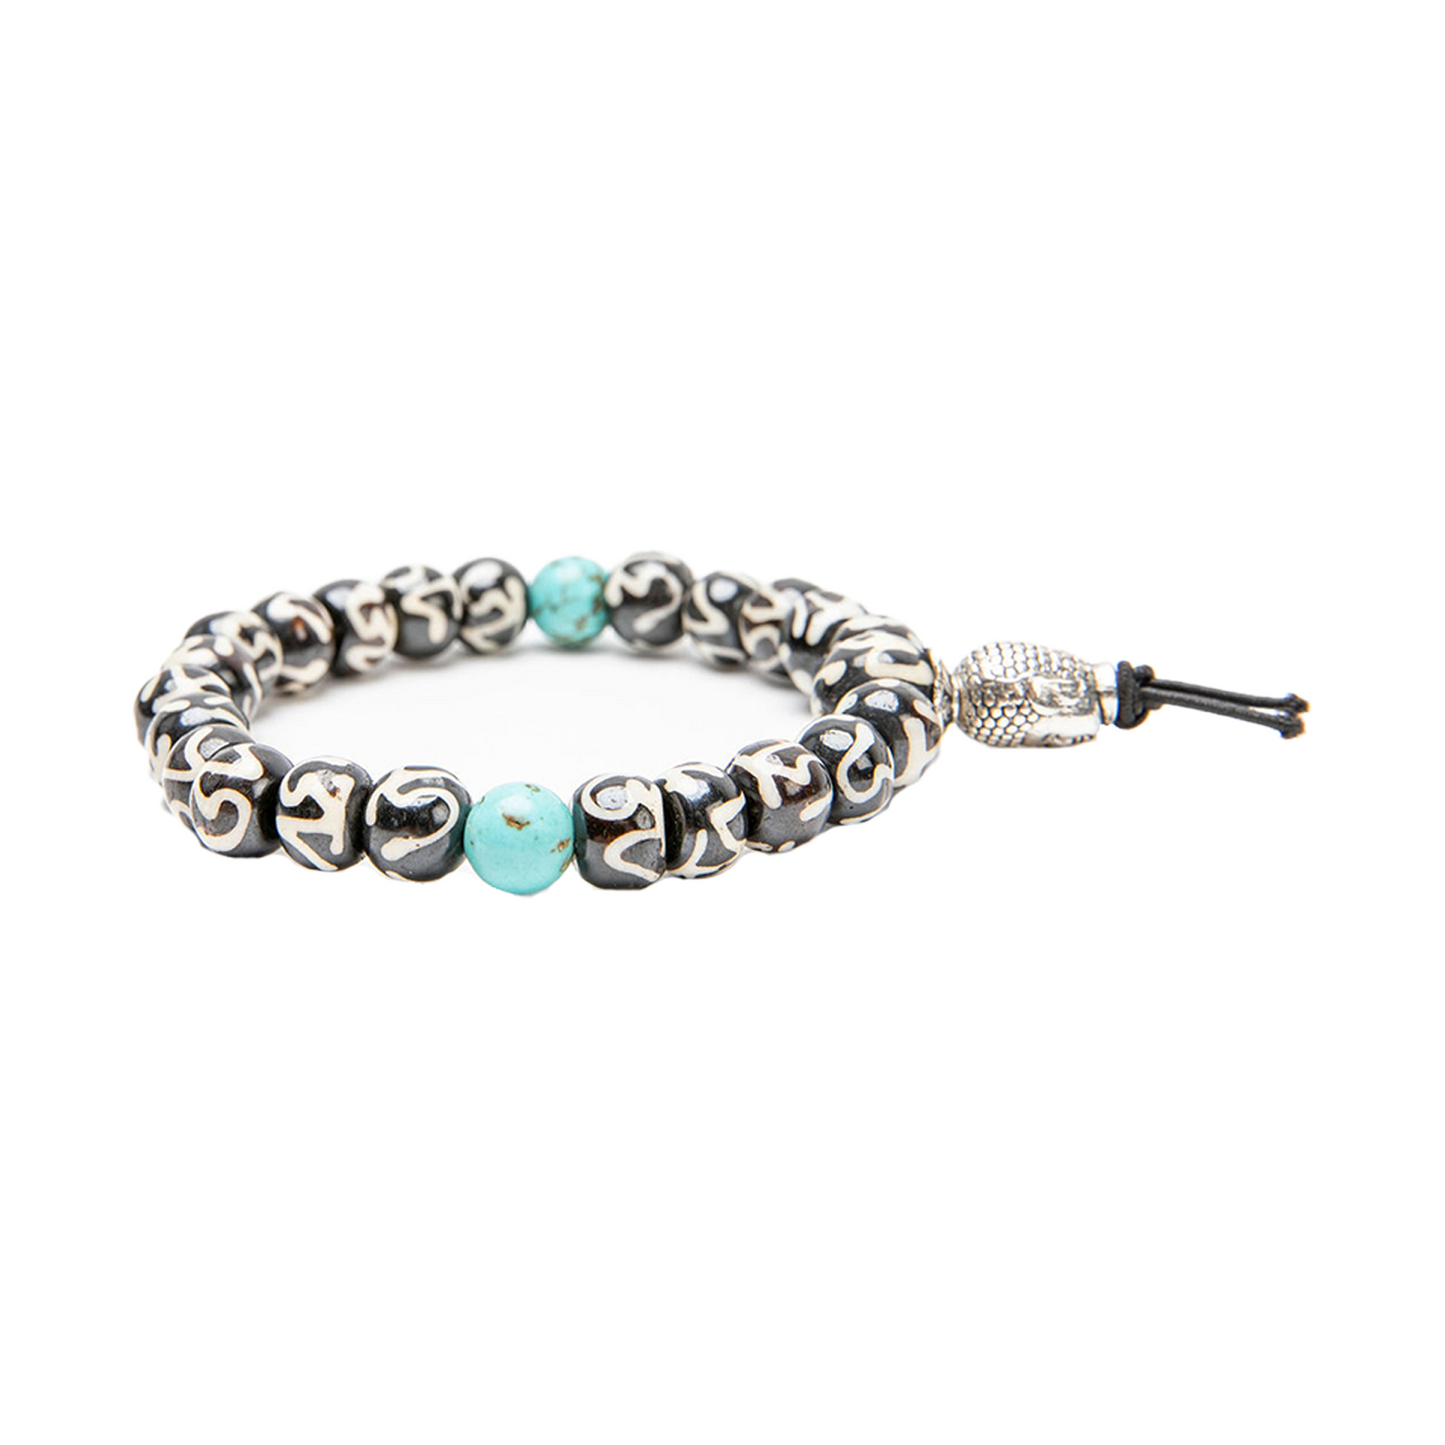 Om Buddha Bracelet on a solid white backdrop side angle. A Turquoise marker bead is in focus.